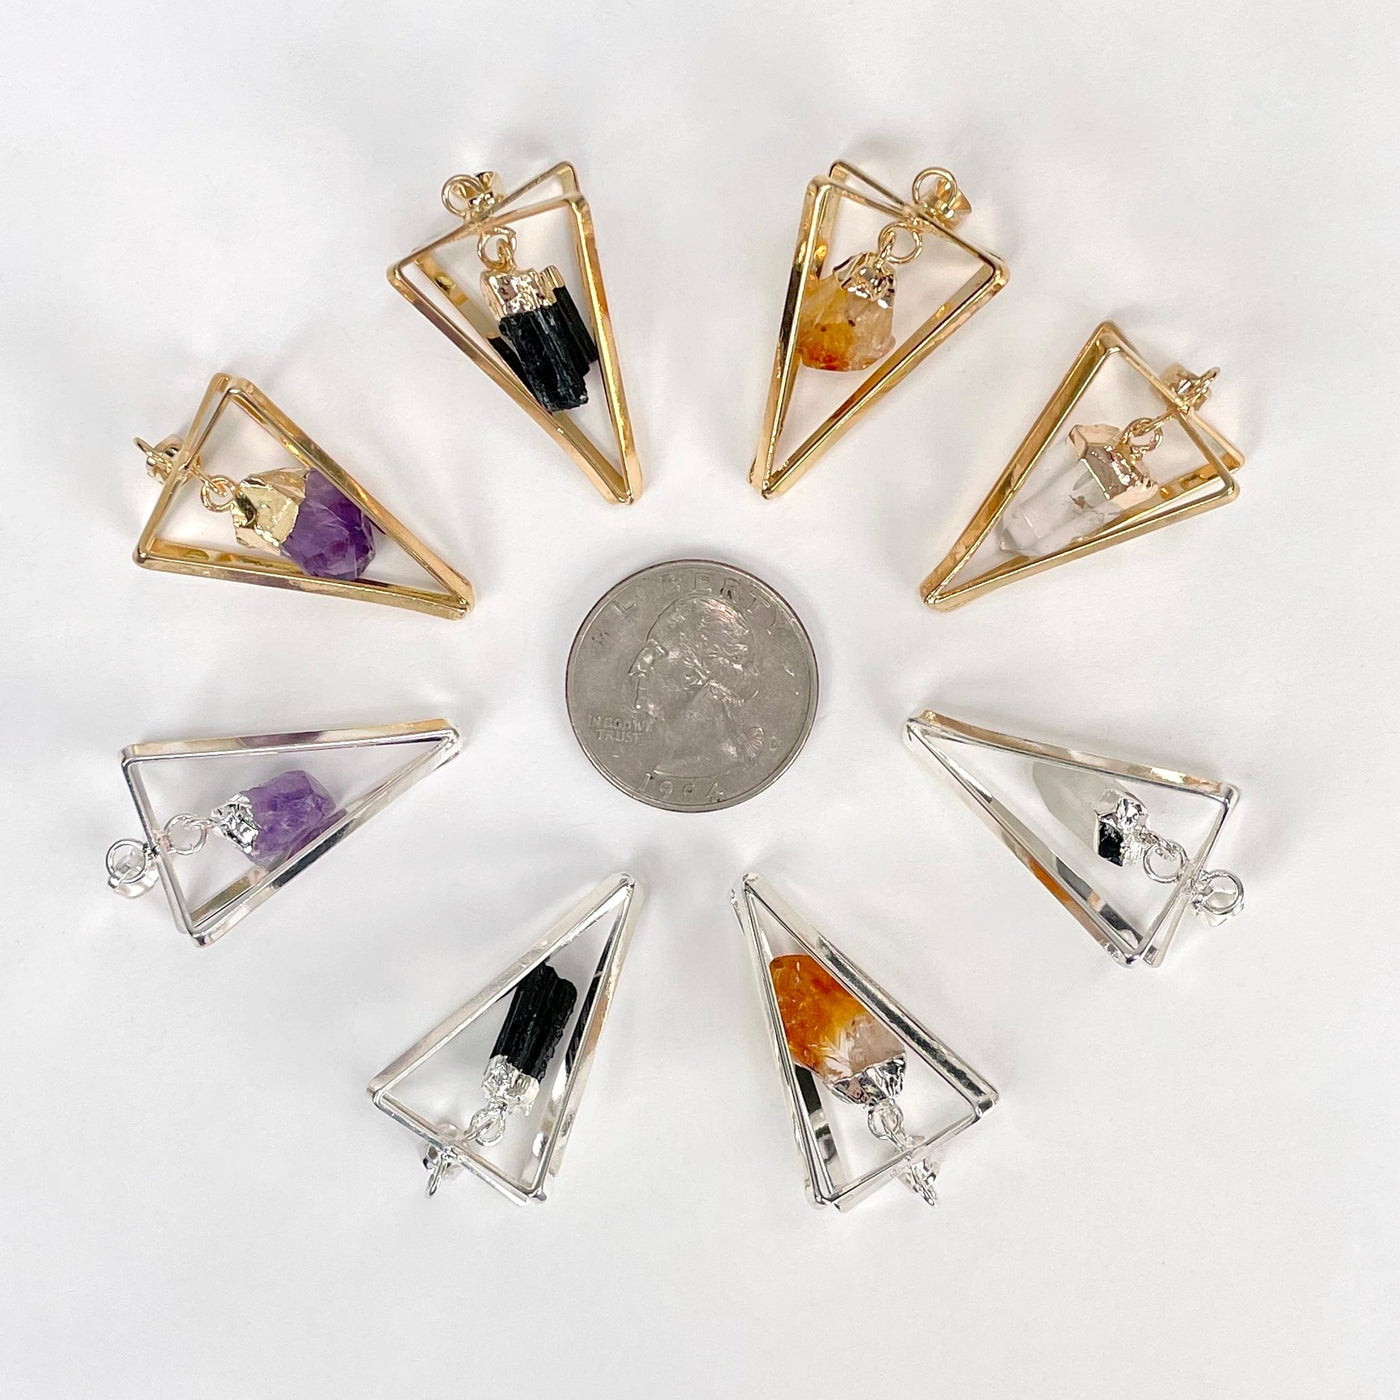 one of each dangle stone point pendulum pendant options surrounding a quarter on white background for size reference